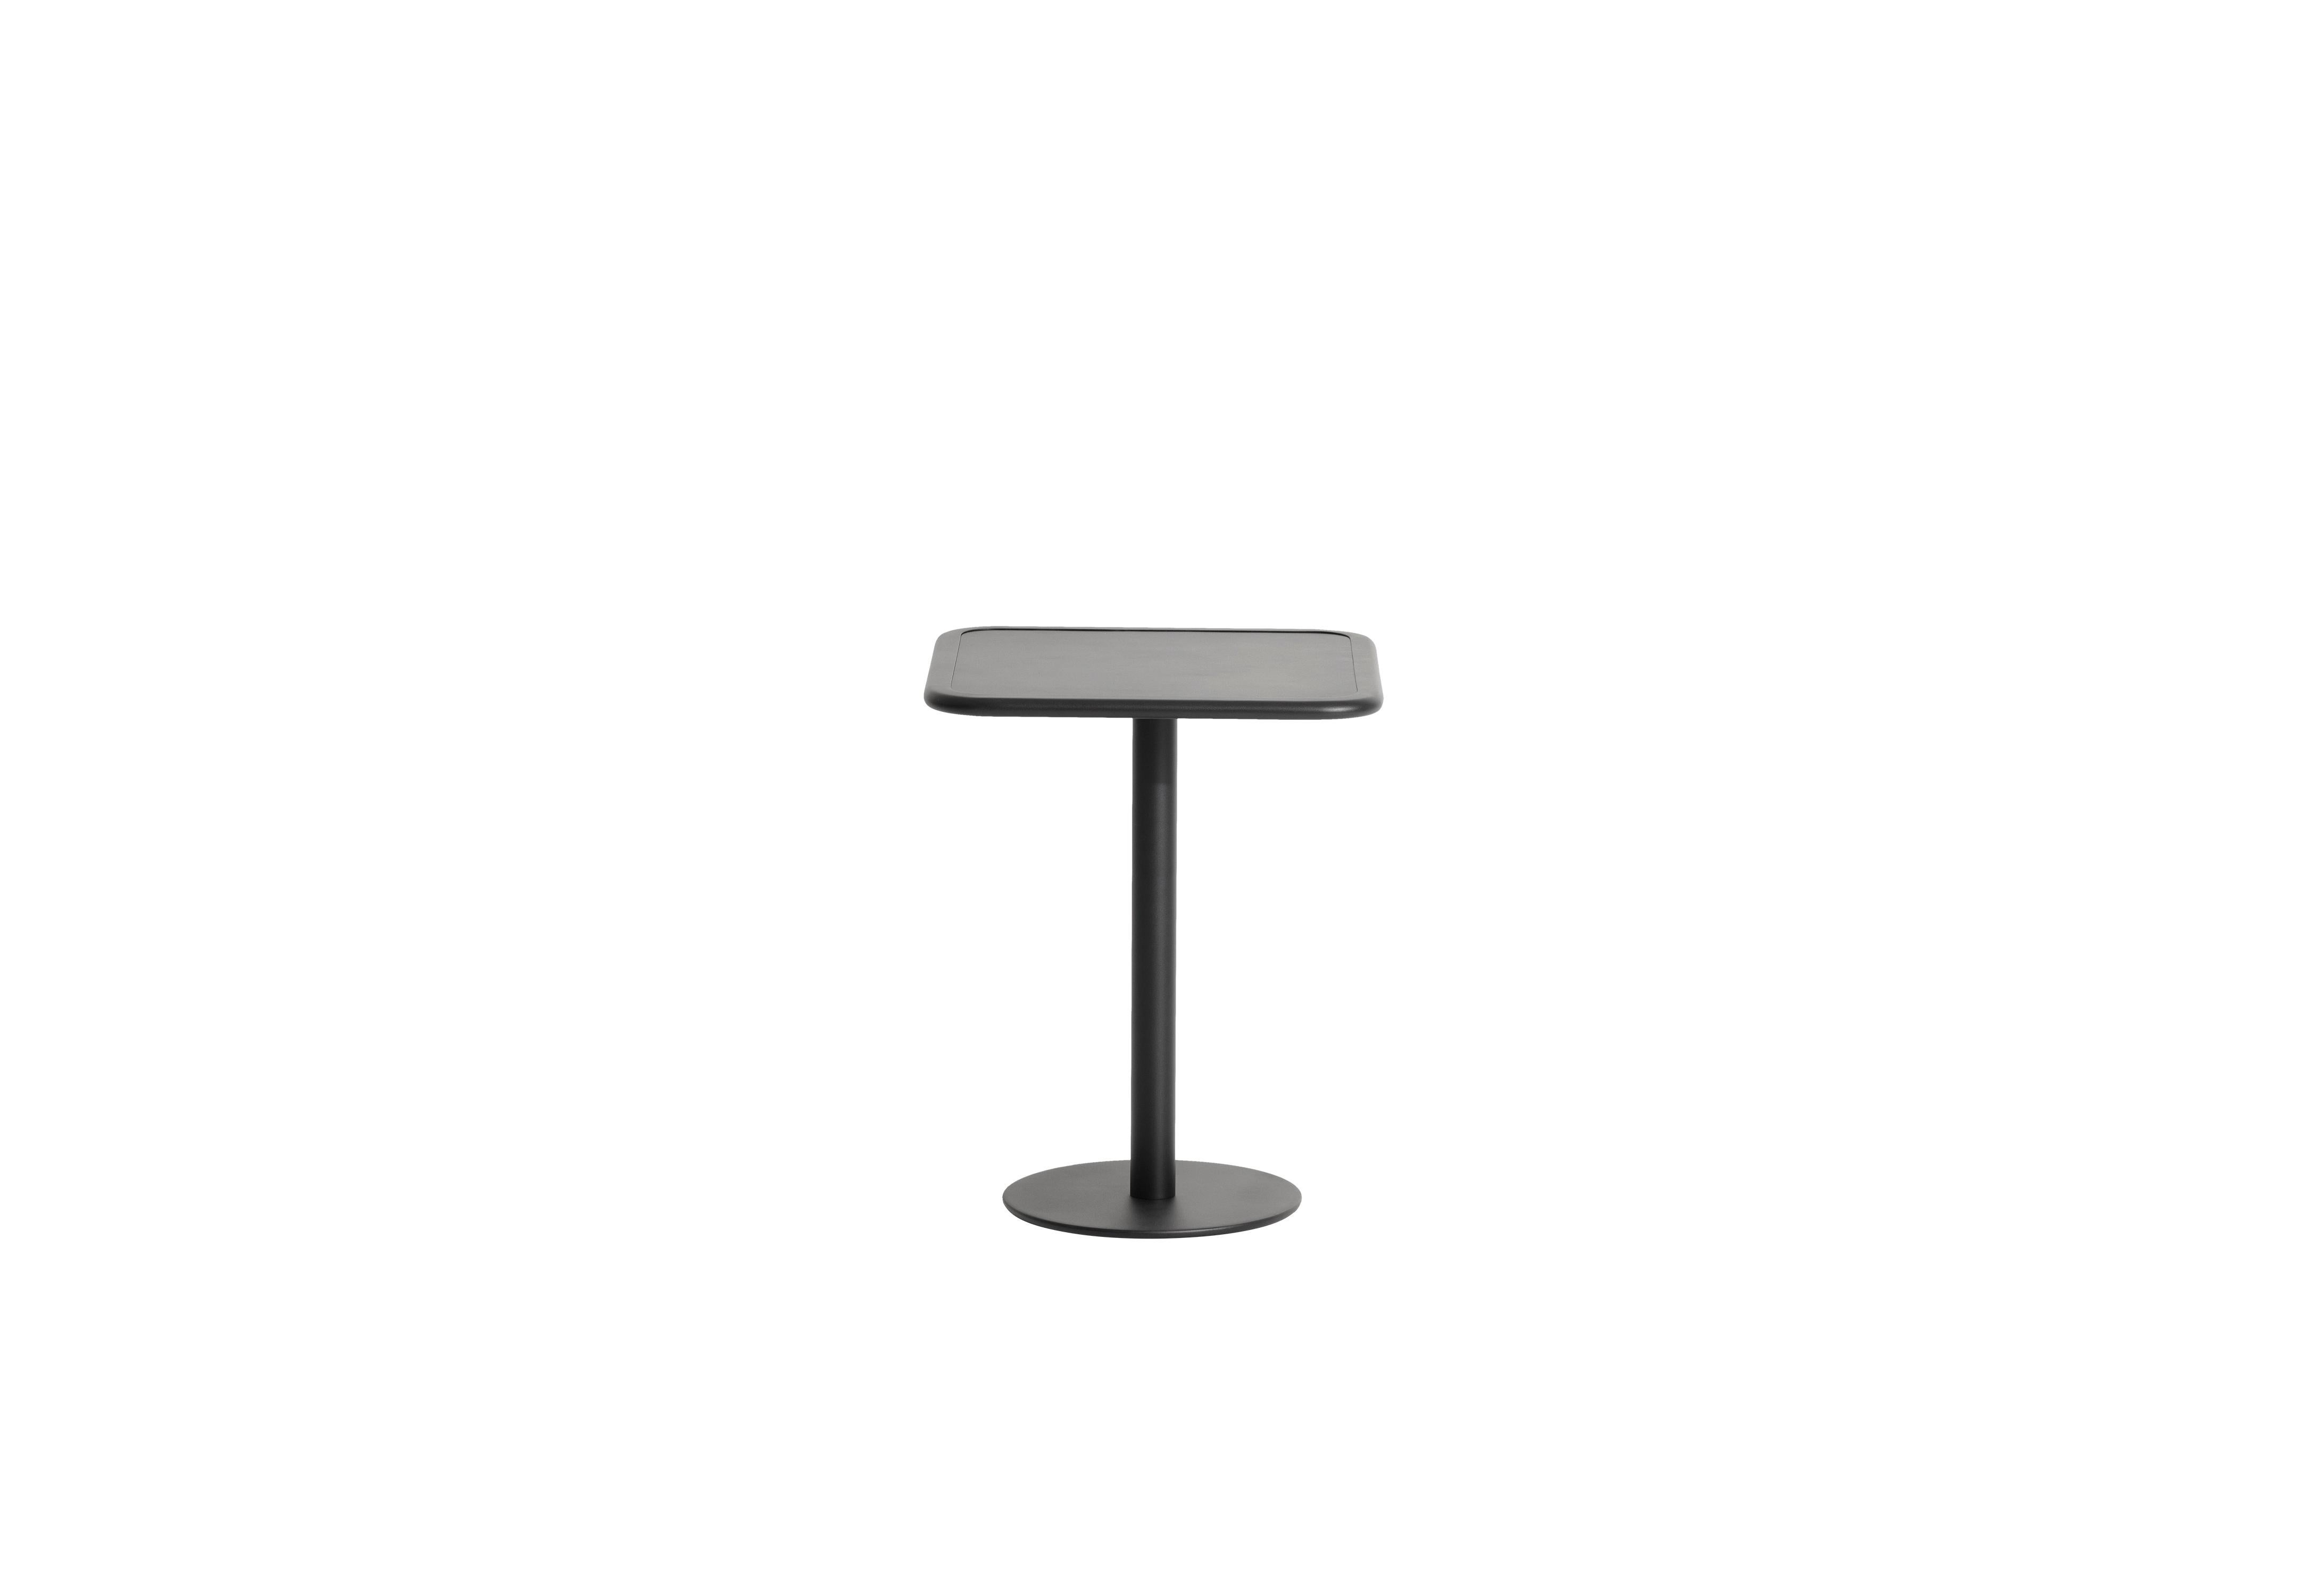 Petite Friture Week-End Bistro Square Dining Table in Black Aluminium by Studio BrichetZiegler, 2017

The week-end collection is a full range of outdoor furniture, in aluminium grained epoxy paint, matt finish, that includes 18 functions and 8